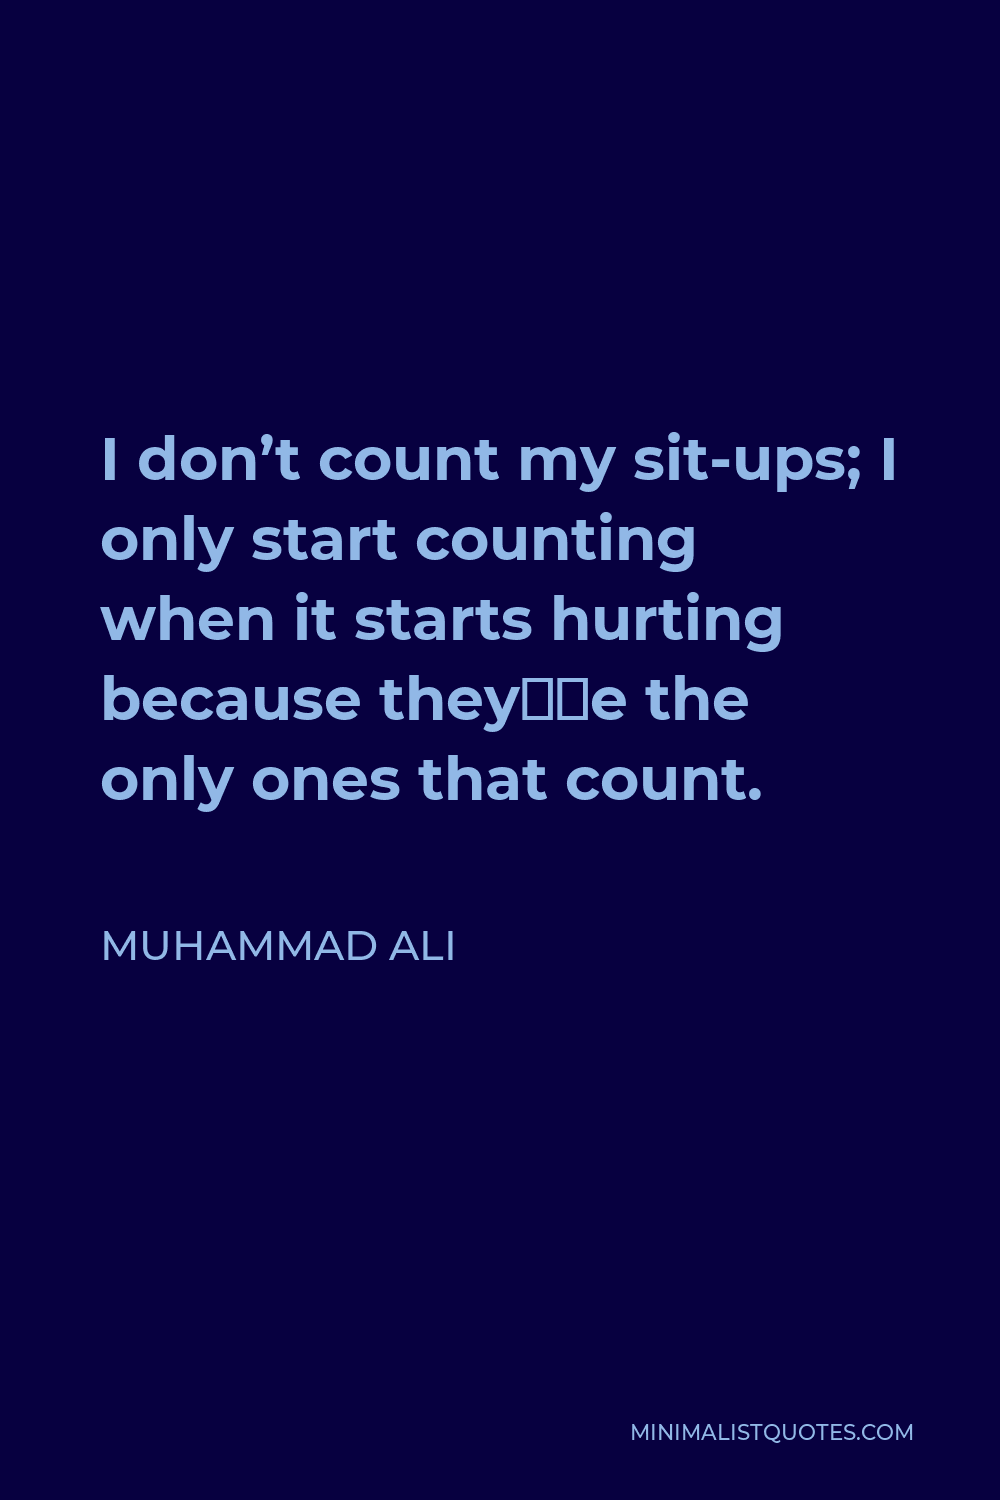 Muhammad Ali Quote - I don’t count my sit-ups; I only start counting when it starts hurting because they’re the only ones that count.